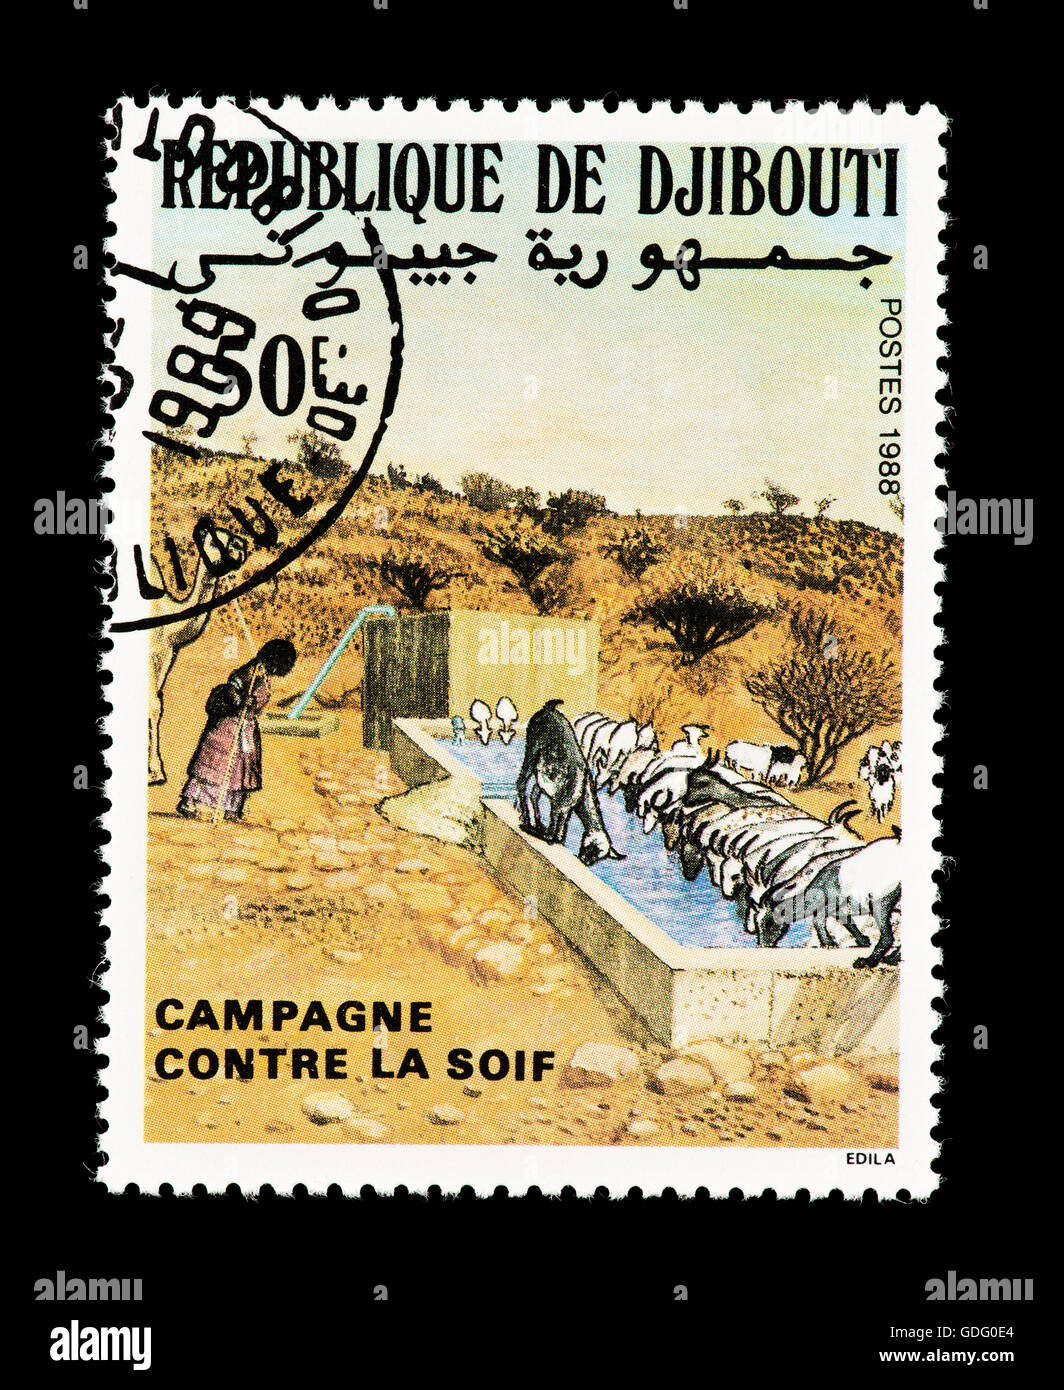 Postage stamp from Djibouti depicting camels and people at a watering hole, issued for the campaign against thirst. Stock Photo